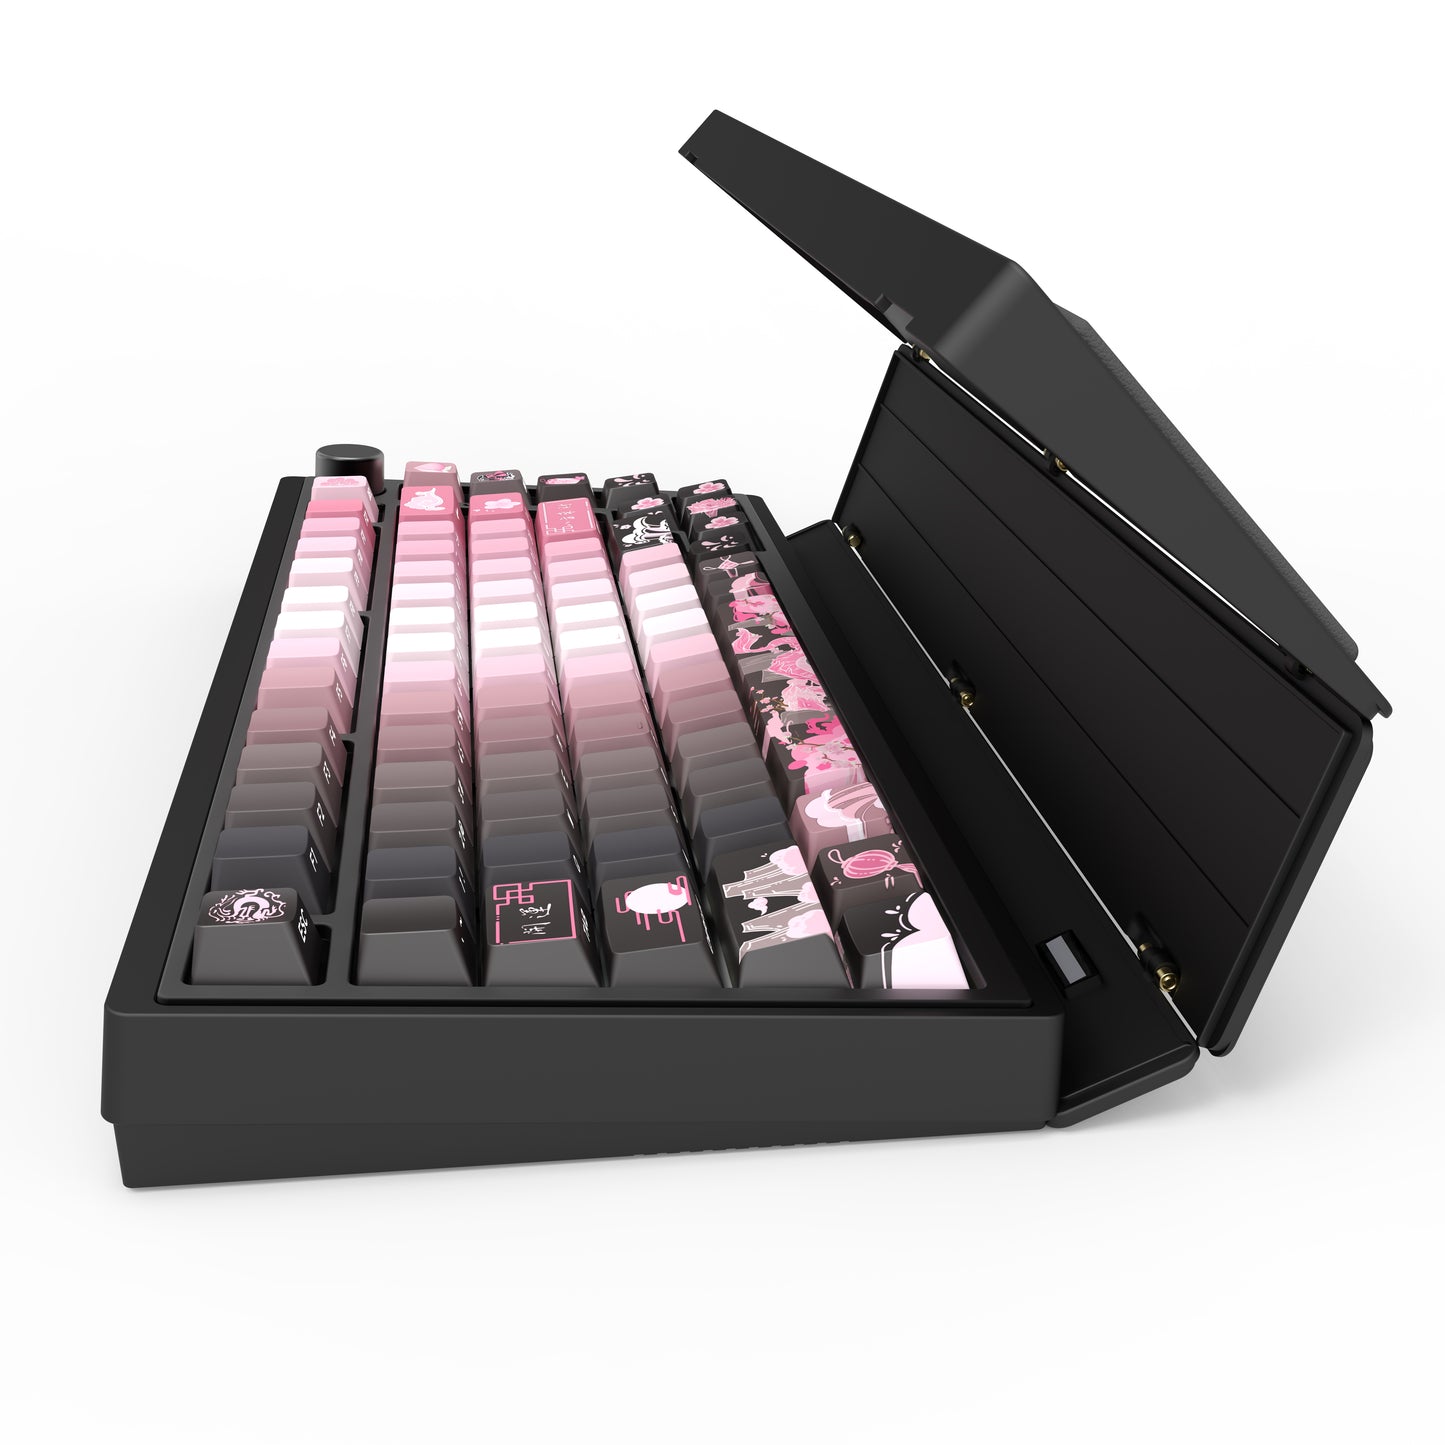 BK75-WIRELESS HOT-SWAPPABLE RGB PRE-BUILT MECHANICAL GAMING KEYBOARD